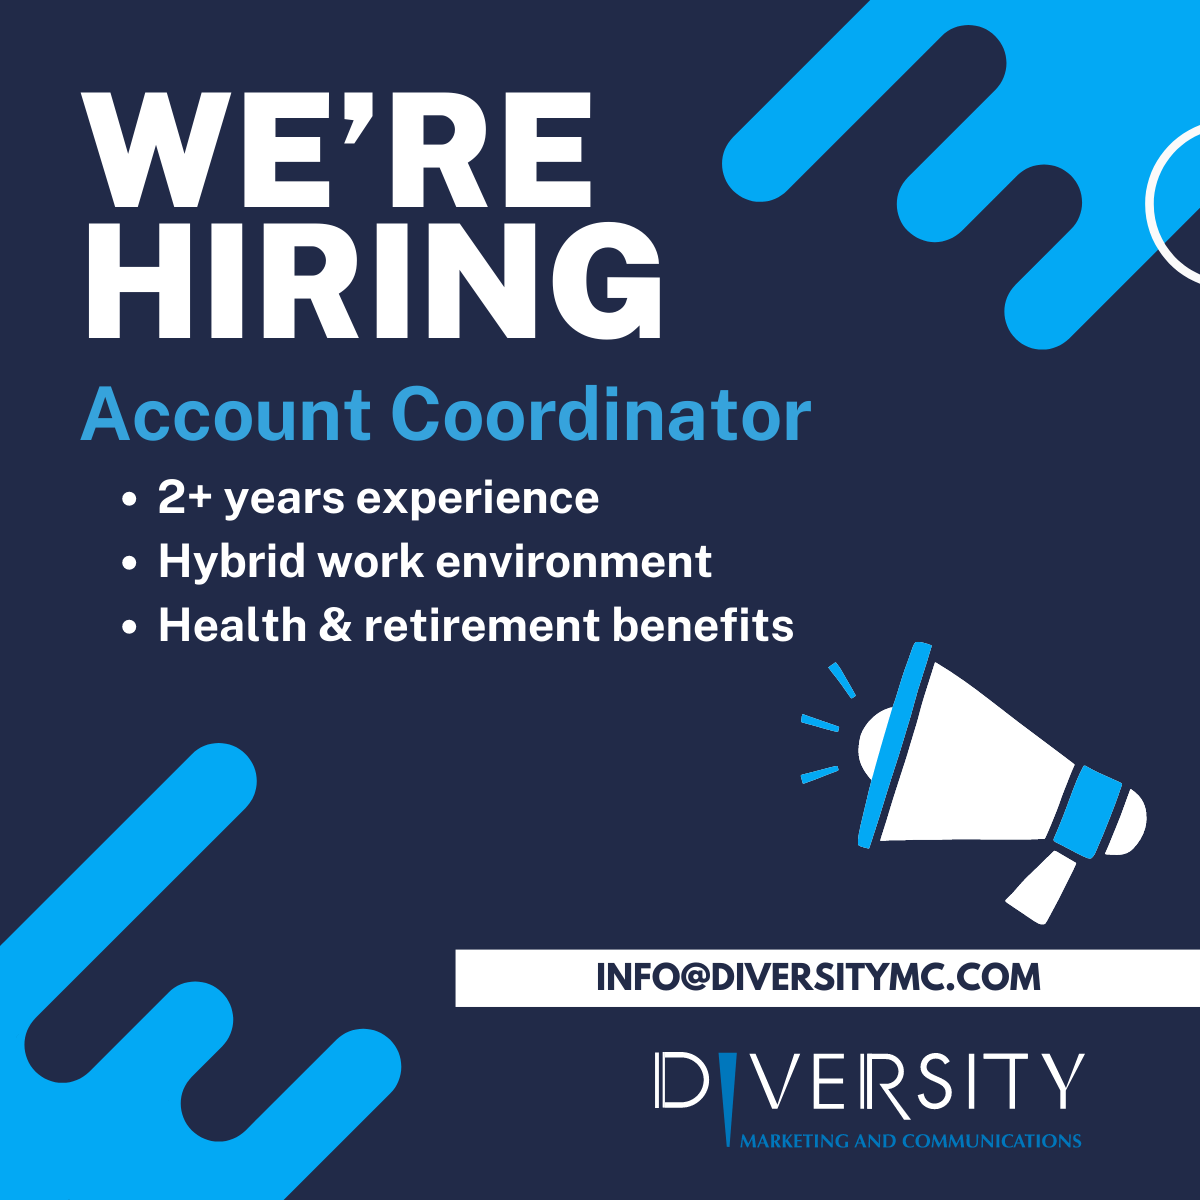 Announcement that Diversity is hiring an Account Coordinator with 2+ years of experience